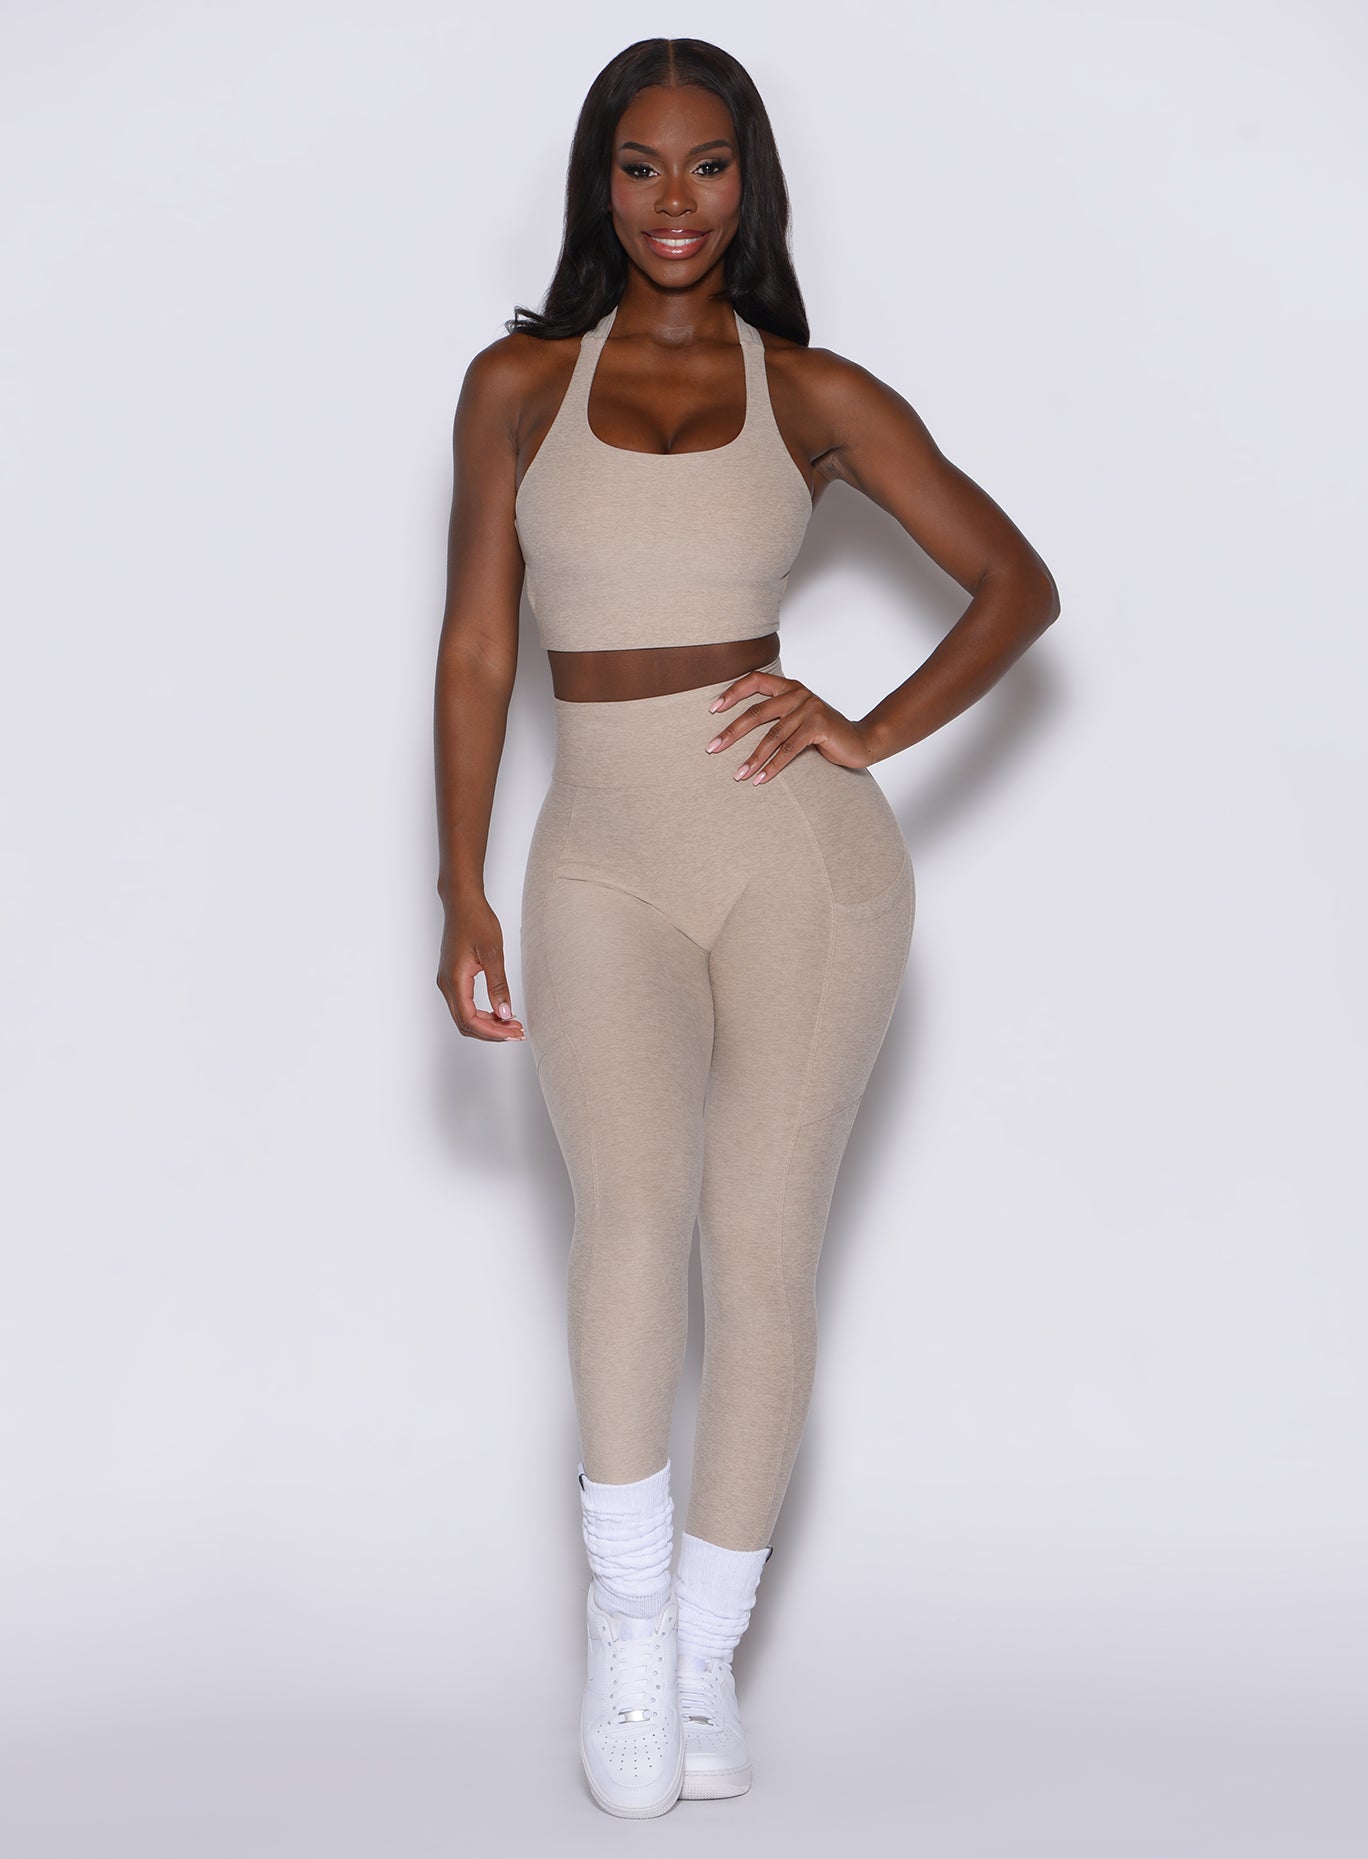 front profile view of a model wearing our Curves leggings in taupe color along with the matching sports bra.